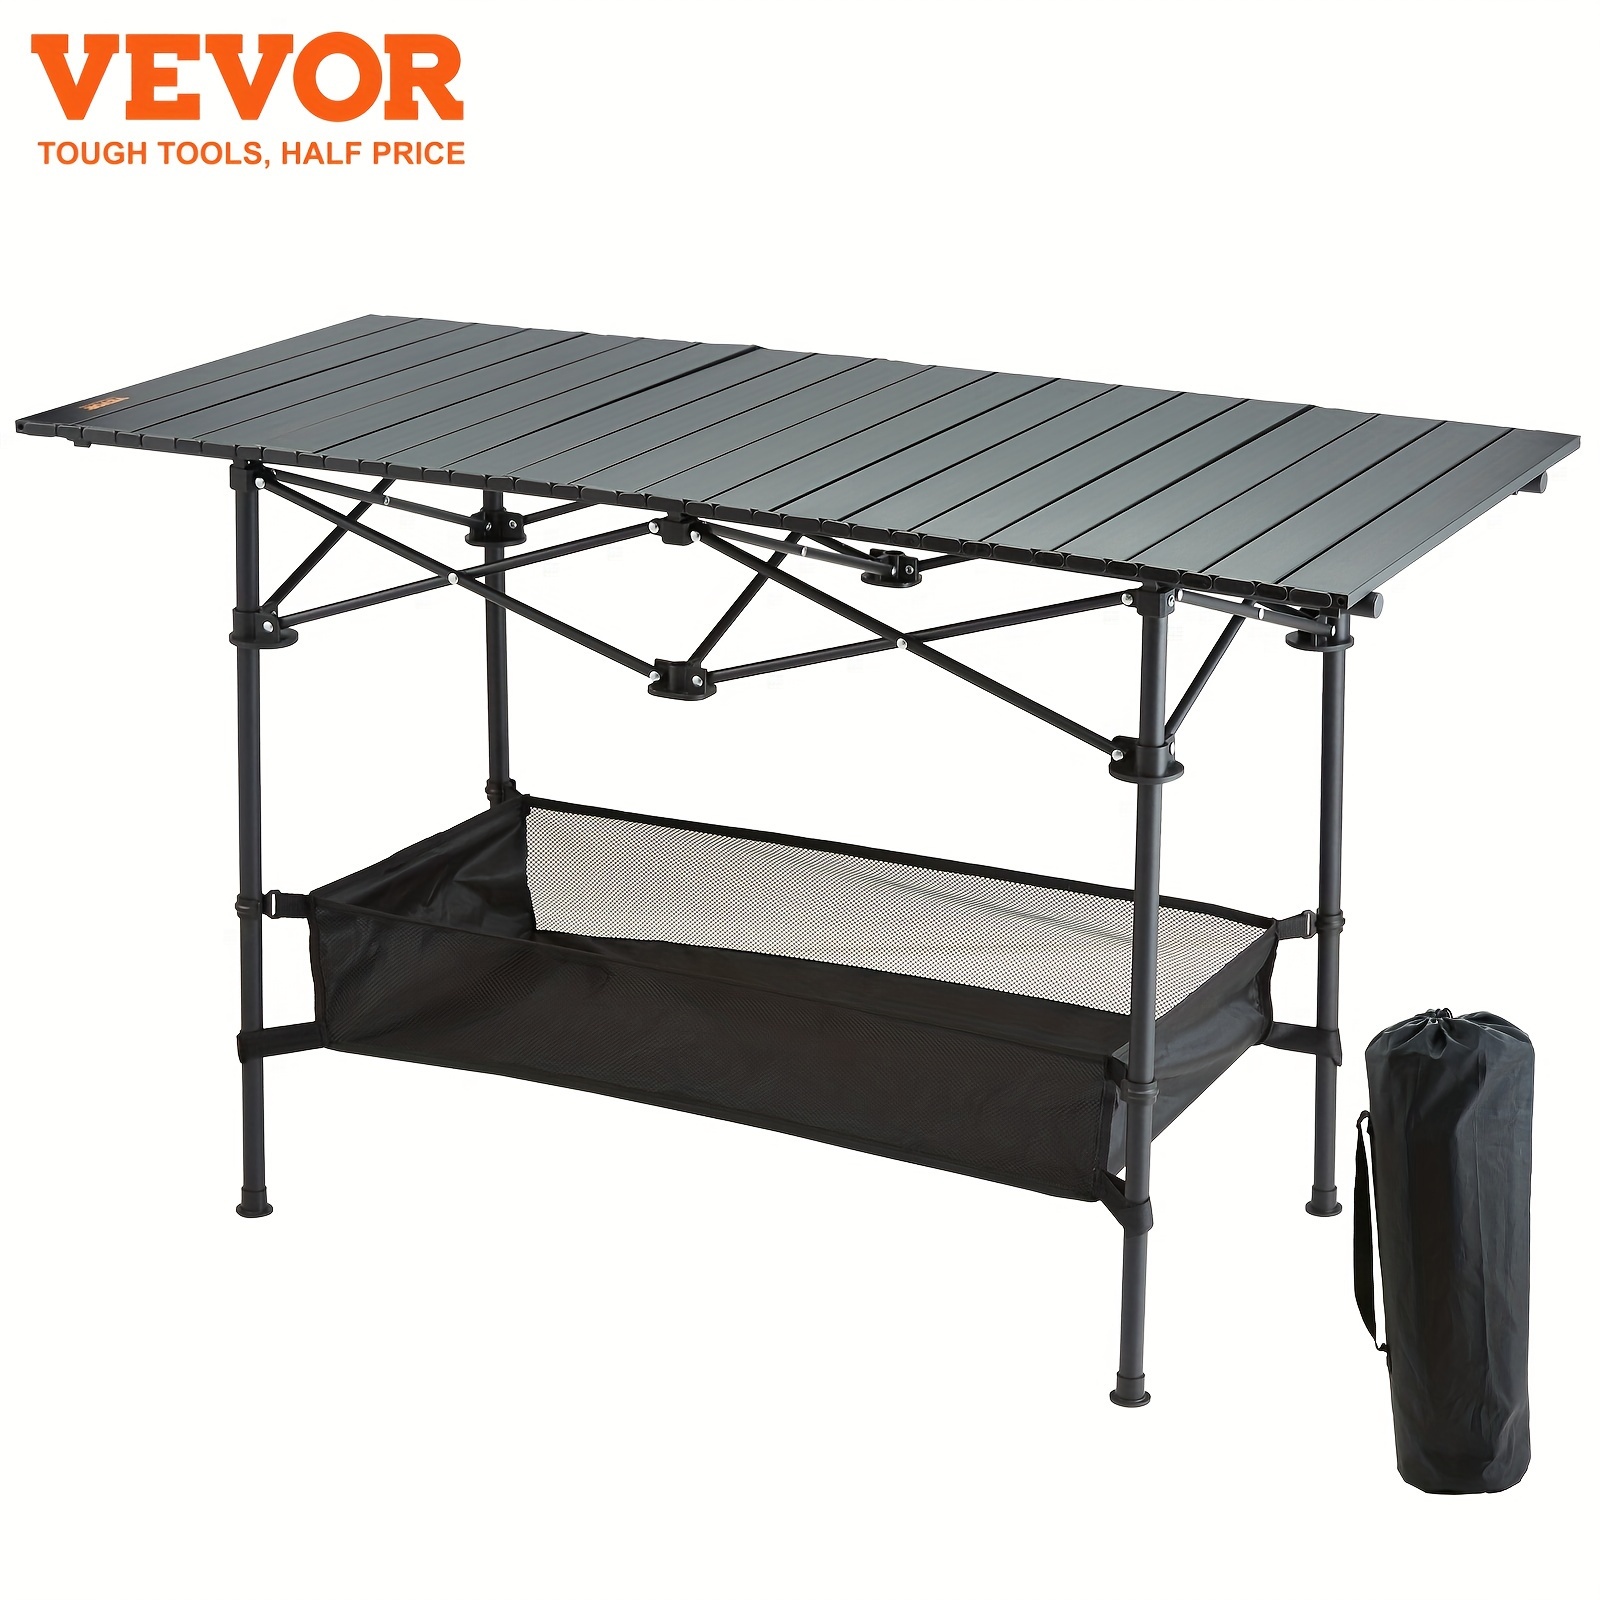 

Vevor 45'' X 22'' Folding Camping Table, Aluminum Ultra Compact Outdoor Portable Fold Up Lightweight Table With Large Storage And Carry Bag, For Beach, Picnic, Travel, Backyard, Bbq, Patio, Black